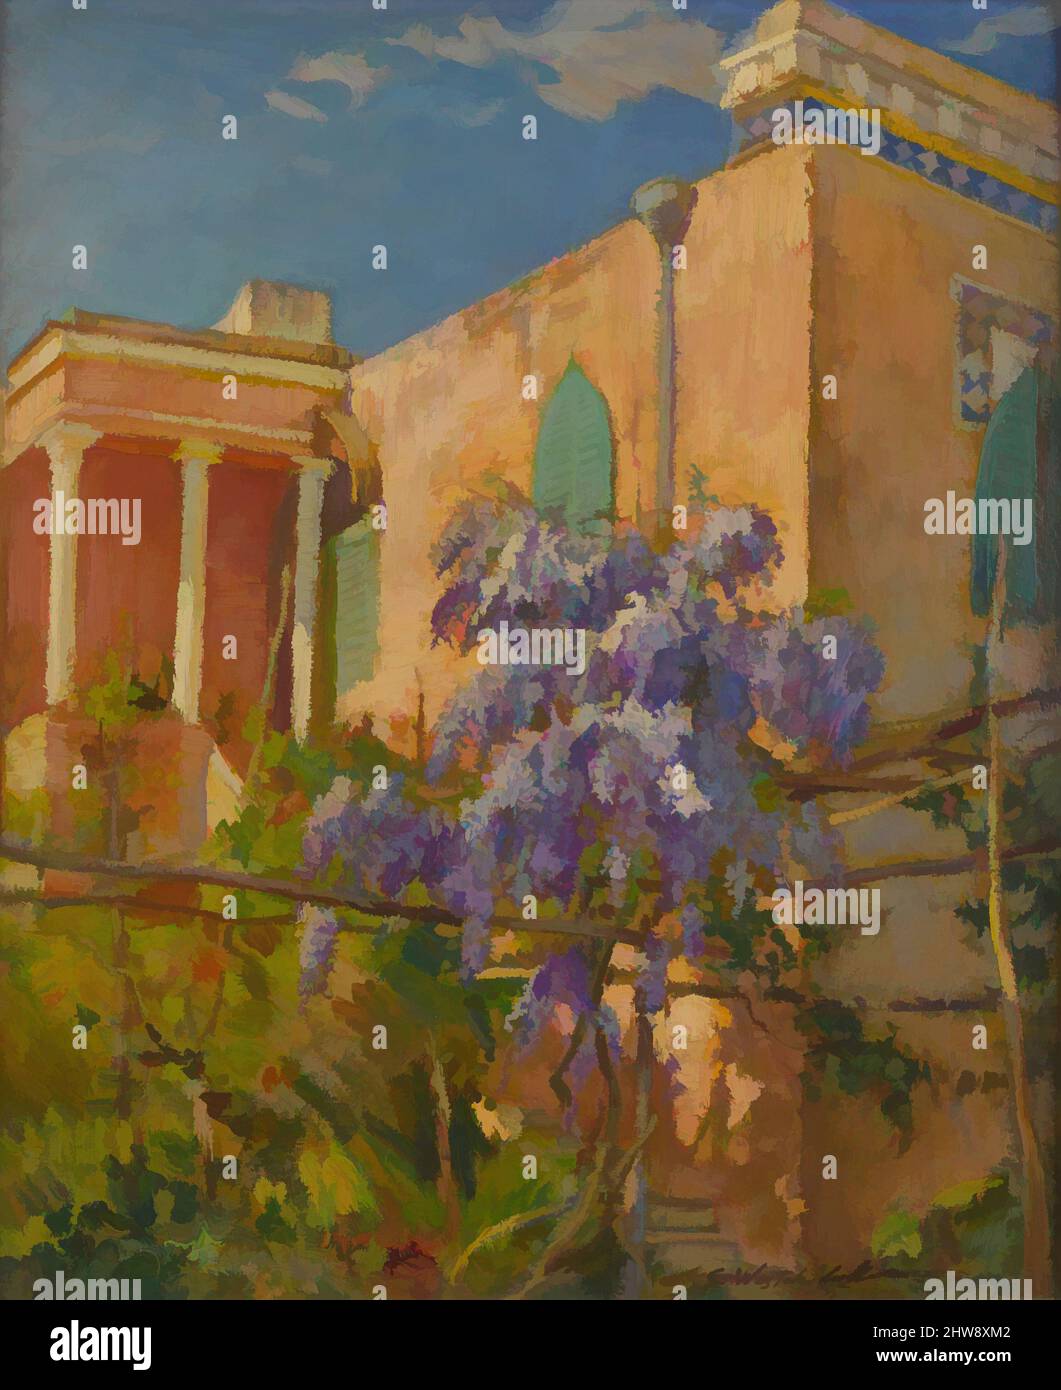 Art inspired by A House with Flowering Trees along the Amalfi Coast of Italy, ca. 1928, Oil on canvas (?), 13 5/8 x 11 1/4 in., Paintings, Constantin Alexandrovitch Westchiloff (Russian, St. Petersburg 1877–1945 New York State, Classic works modernized by Artotop with a splash of modernity. Shapes, color and value, eye-catching visual impact on art. Emotions through freedom of artworks in a contemporary way. A timeless message pursuing a wildly creative new direction. Artists turning to the digital medium and creating the Artotop NFT Stock Photo